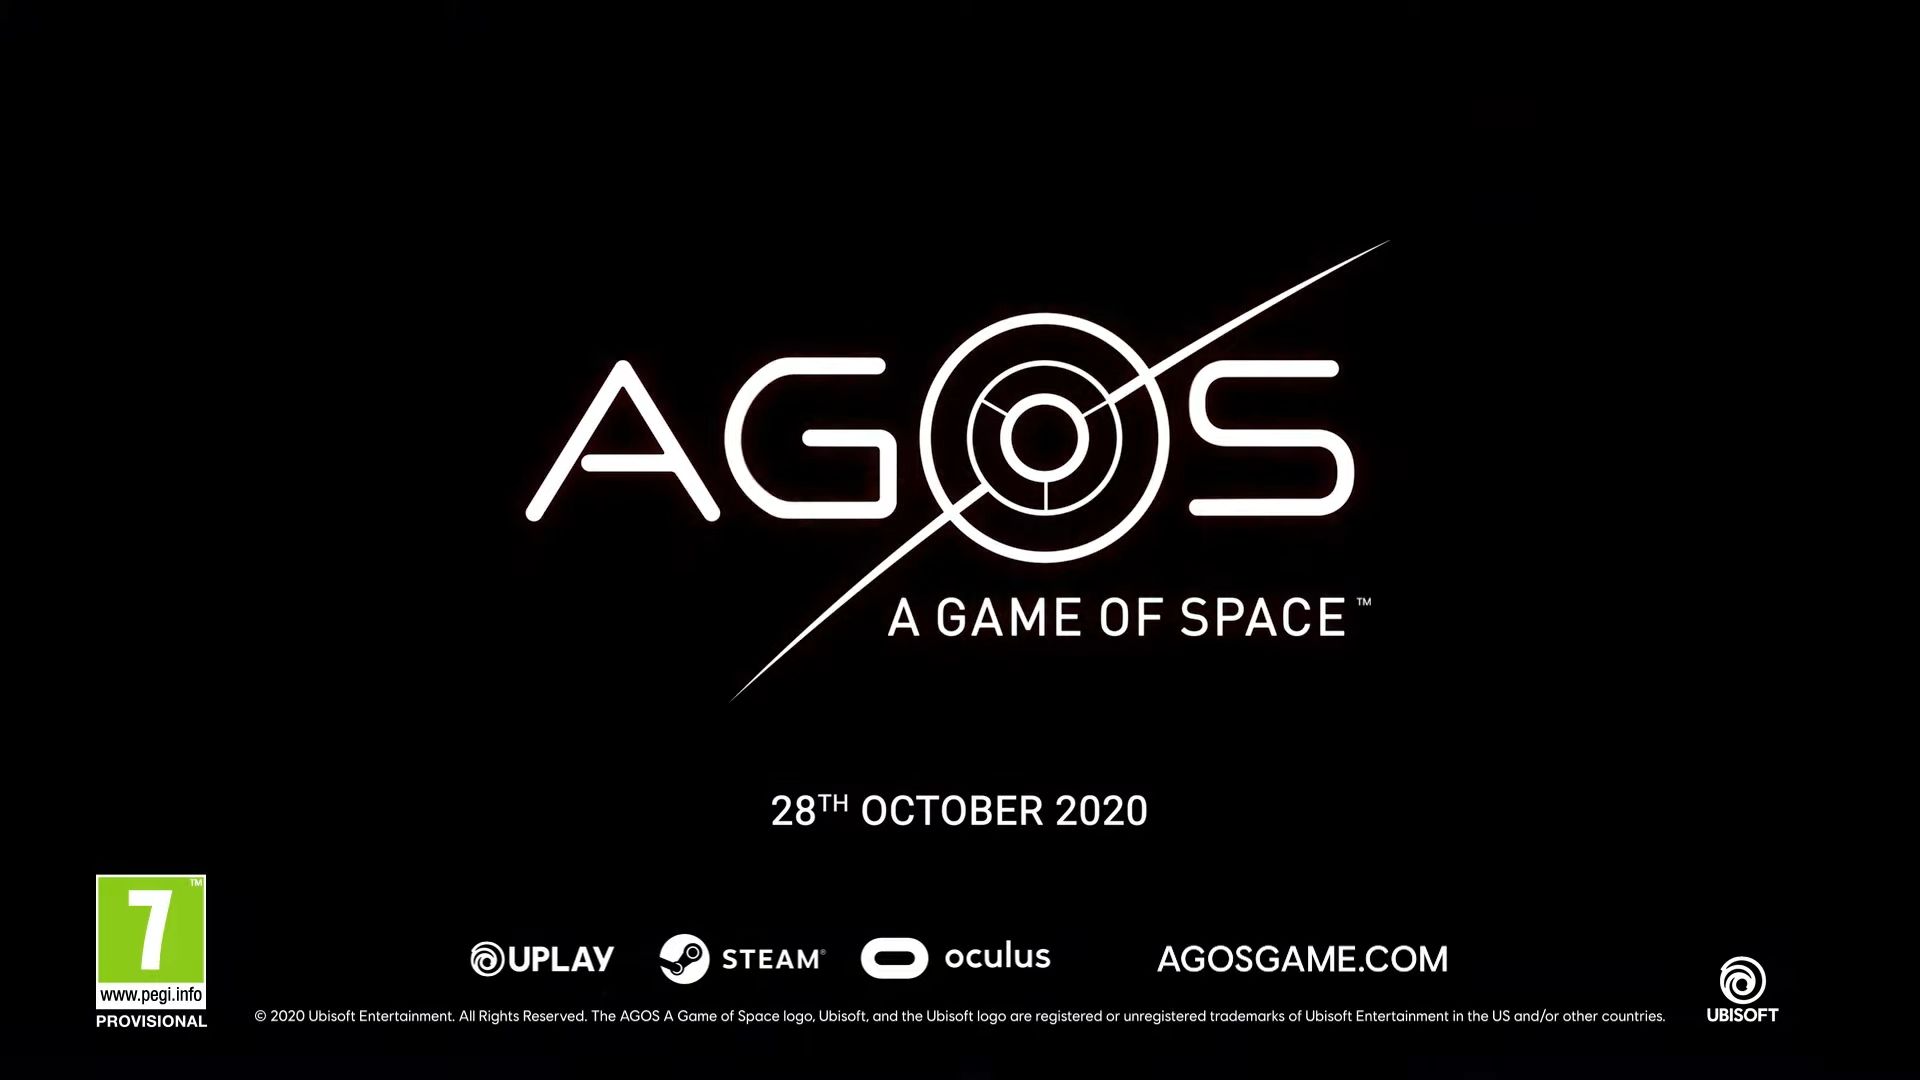 AGOS - A Game of Space